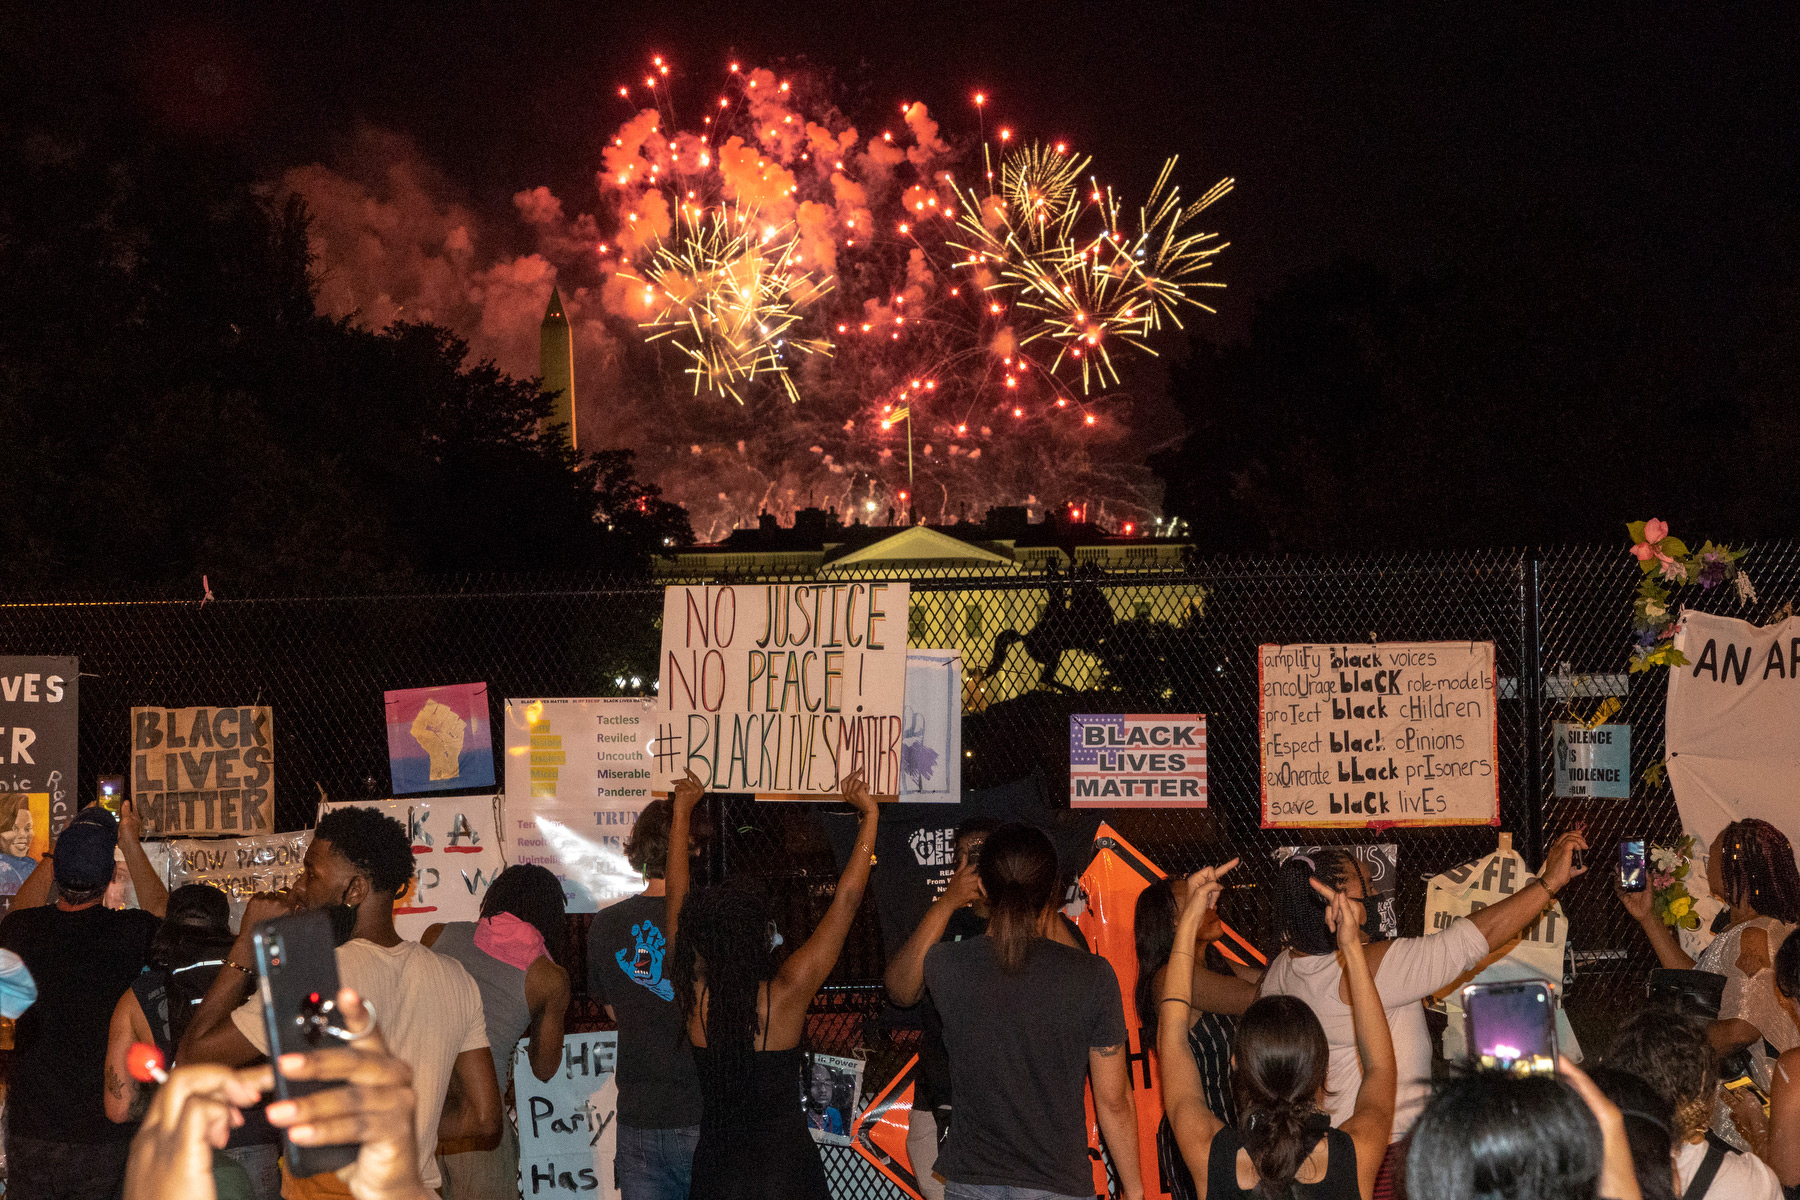 <strong>Washington, Aug., 27, 2020.</strong> "A modest number of protesters gathered outside the fence sealing off the White House from Black Lives Matter Plaza. As Trump's speech accepting the Presidential nomination ended, a massive display of fireworks filled the air. Some protesters pressed against the fence to shout obscenities and wave their middle finger towards the White House. It feels as if the tension is only going to ramp up as the election quickly approaches." (Peter van Agtmael—Magnum Photos for TIME)